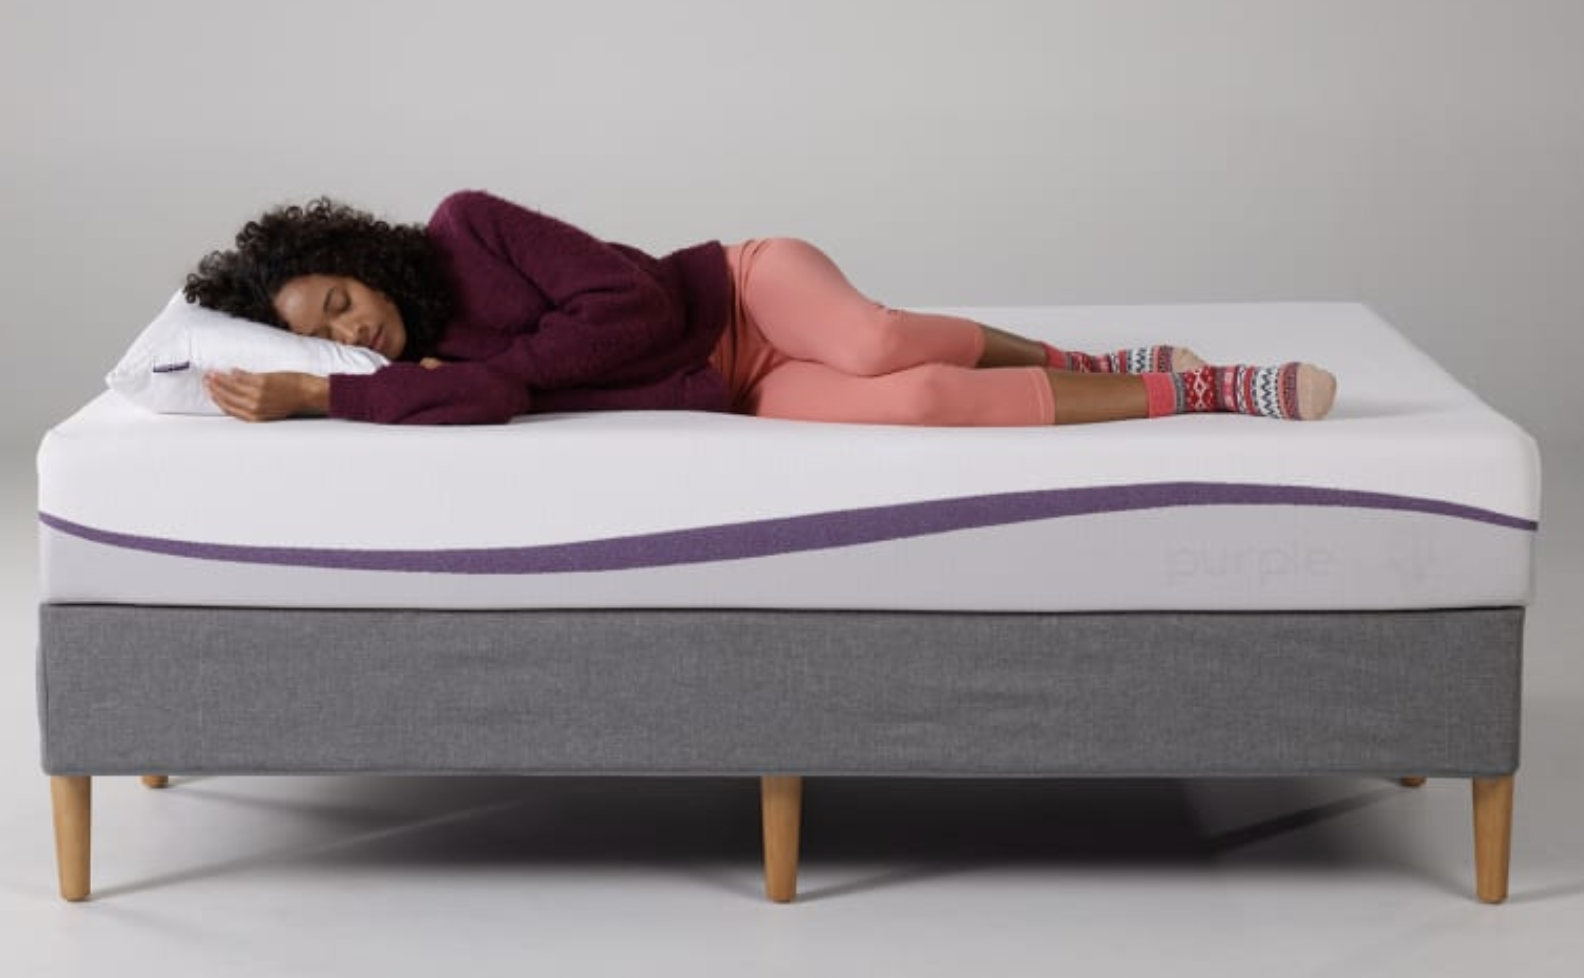 19 Best Mattresses For Back Pain 2022, Which Type Of Bed Is Best For Back Pain